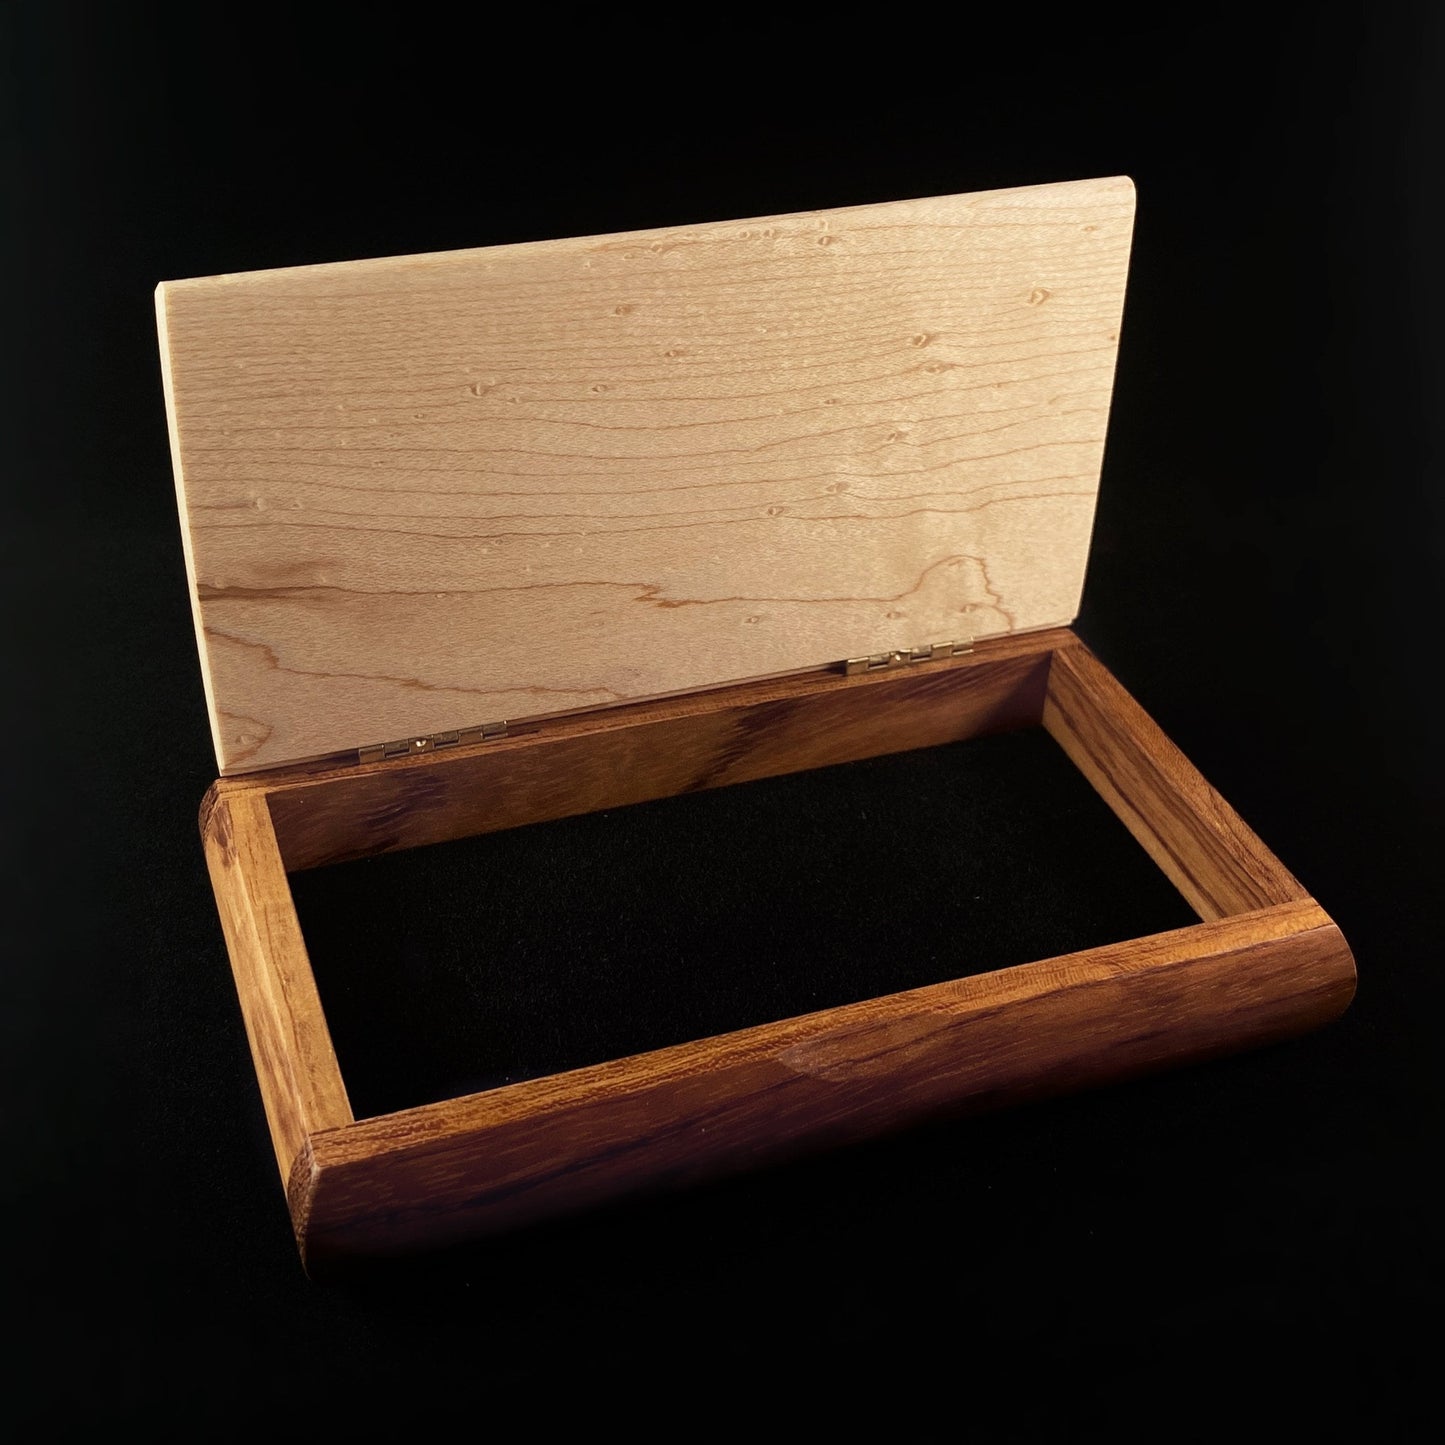 Golf Is A Good Walk Spoiled Quote Box, Handmade Wooden Box with Birdseye Maple and Bubinga, made in USA